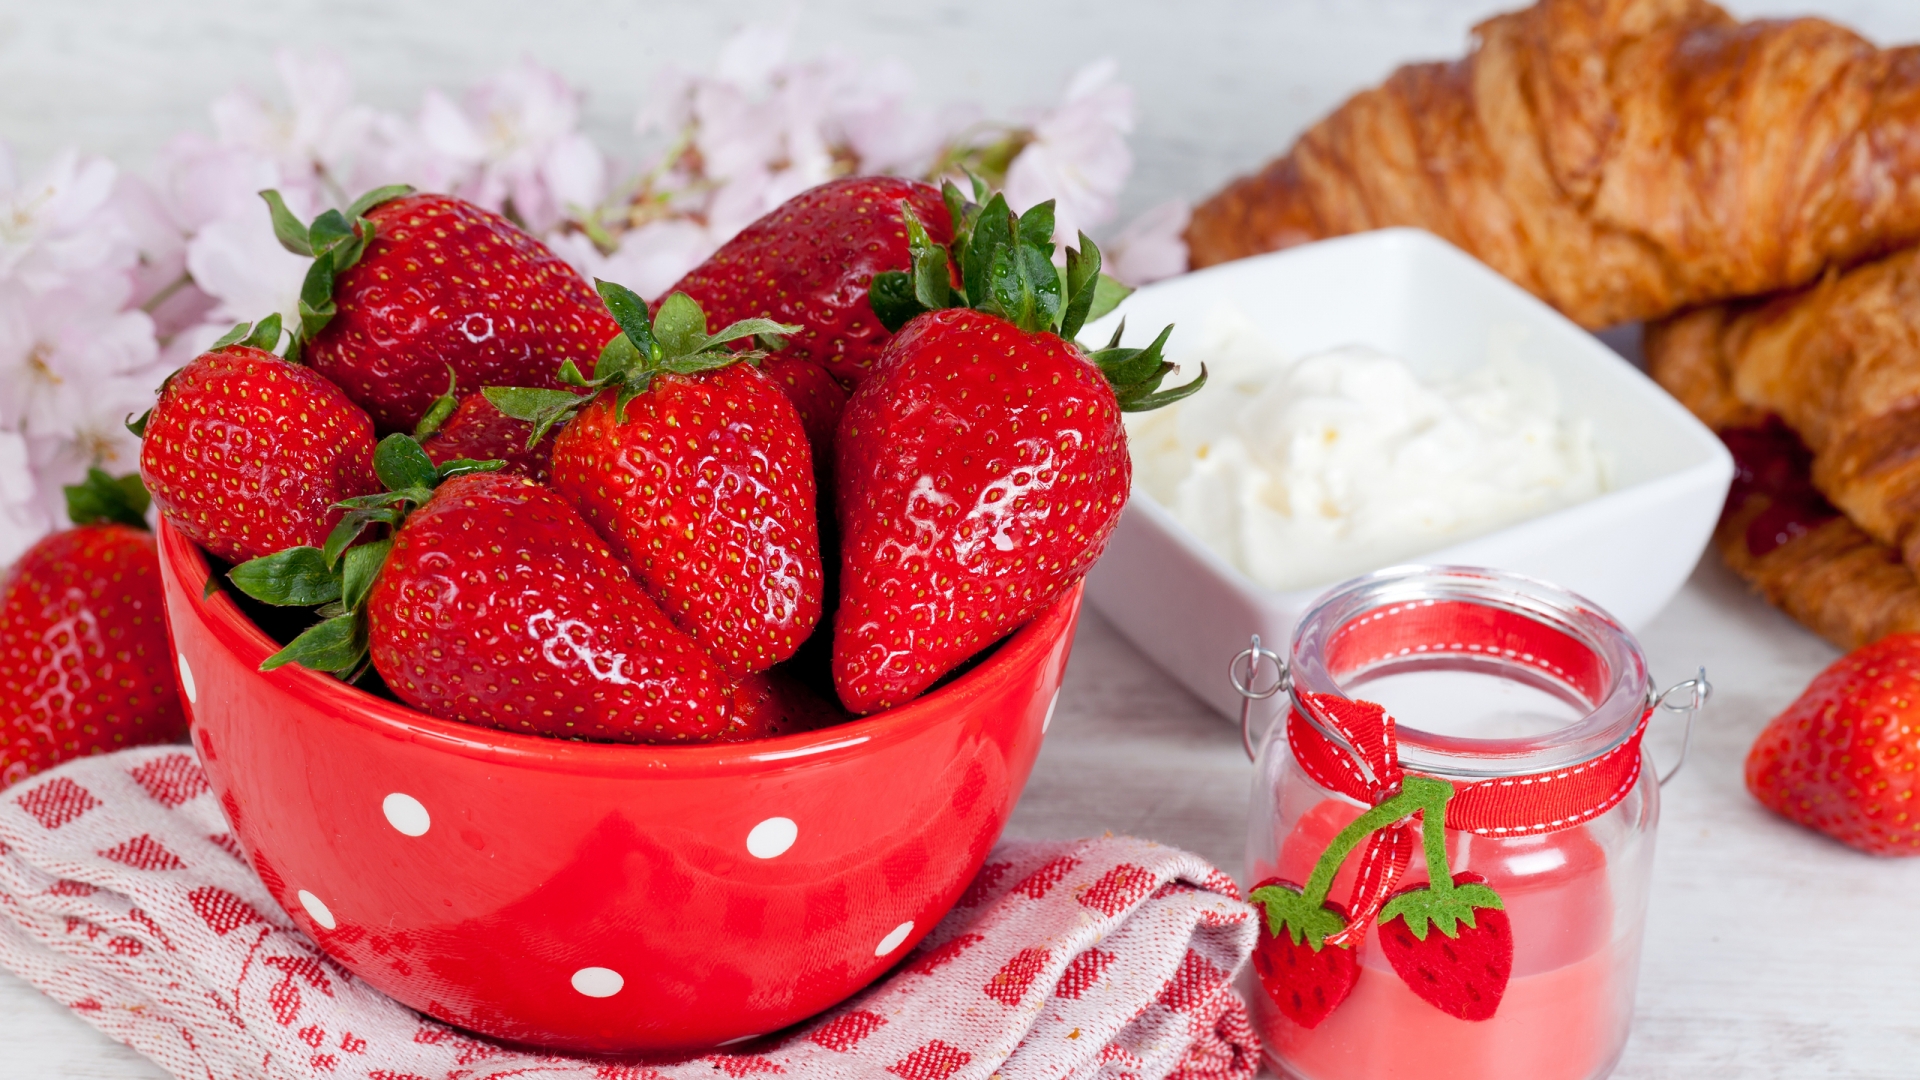 Strawberries and Sour Cream for 1920 x 1080 HDTV 1080p resolution